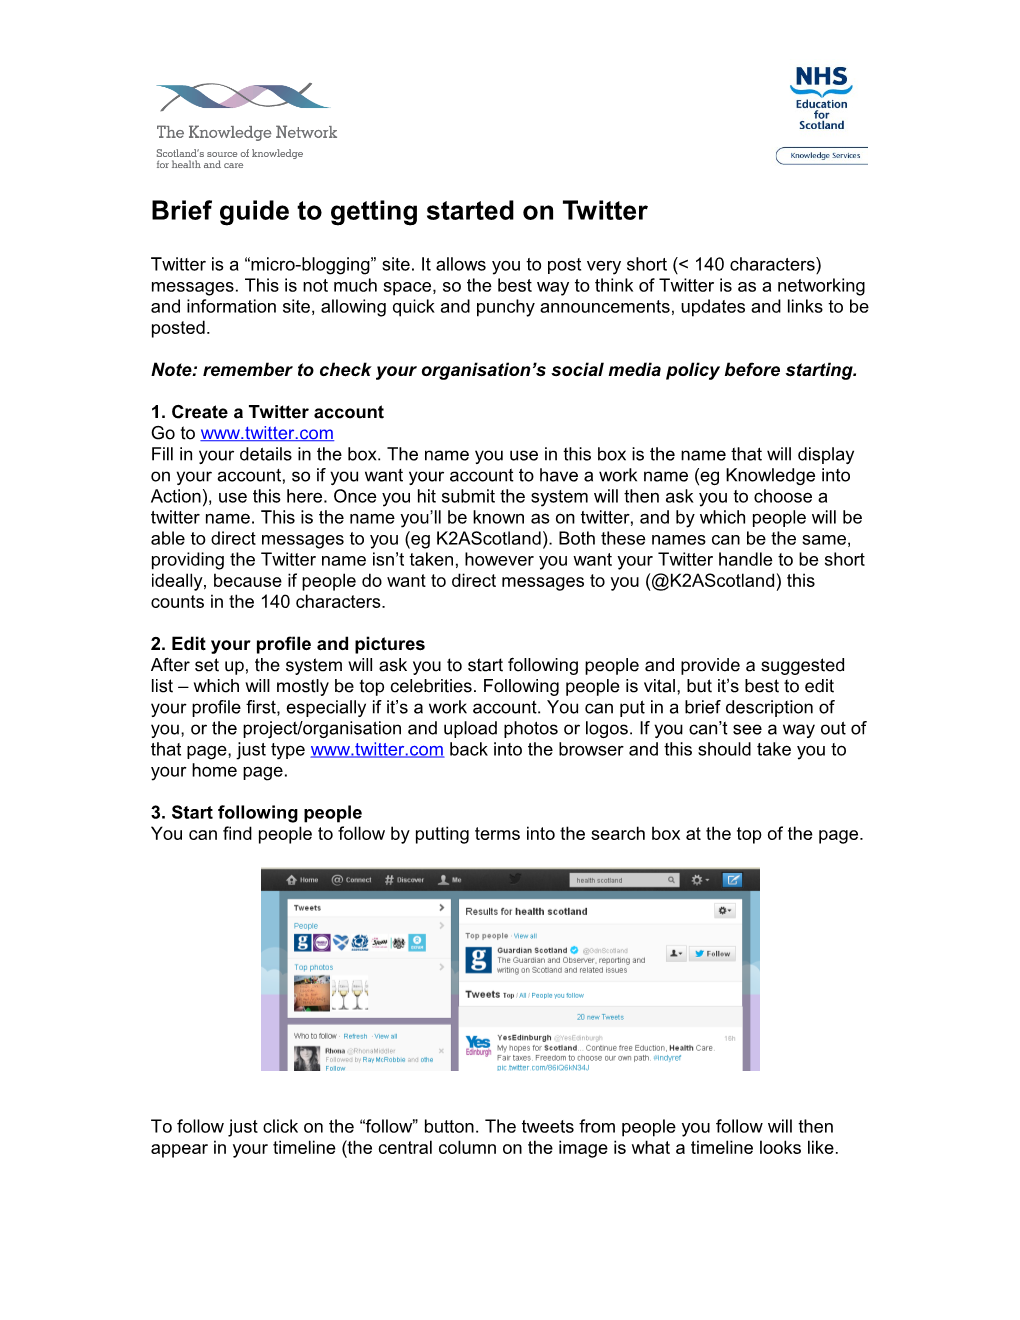 Guide to Getting Started on Twitter